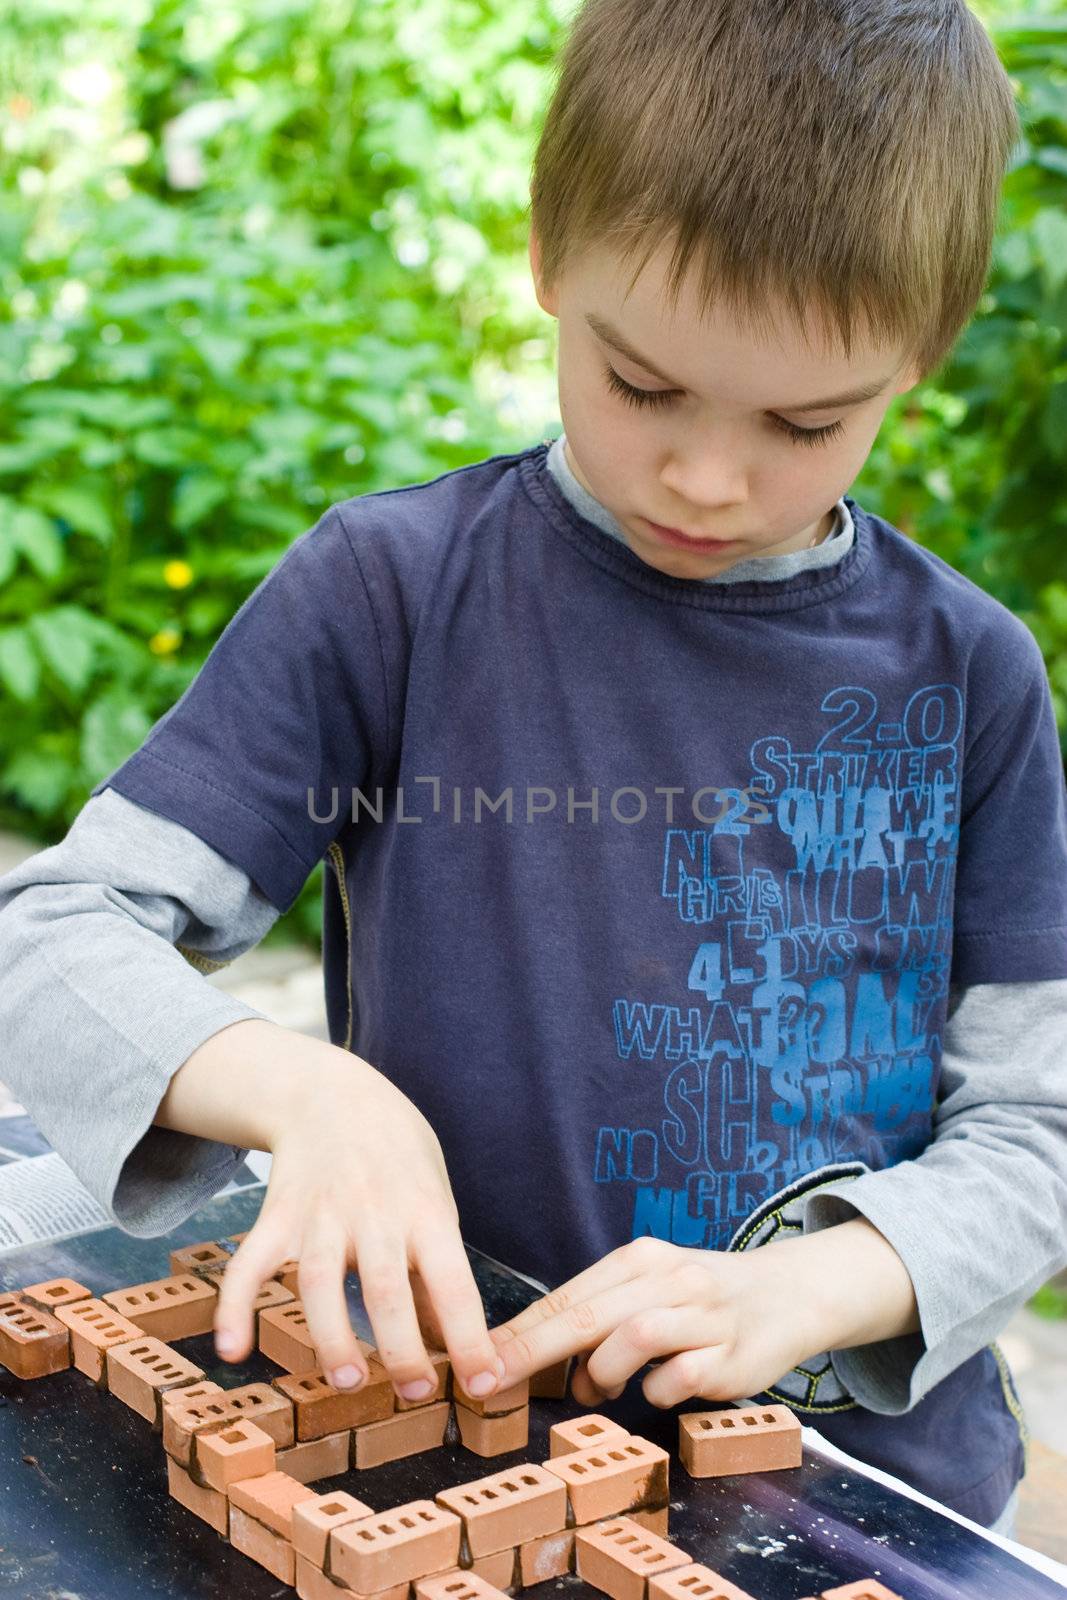 Young boy building a house with bricks